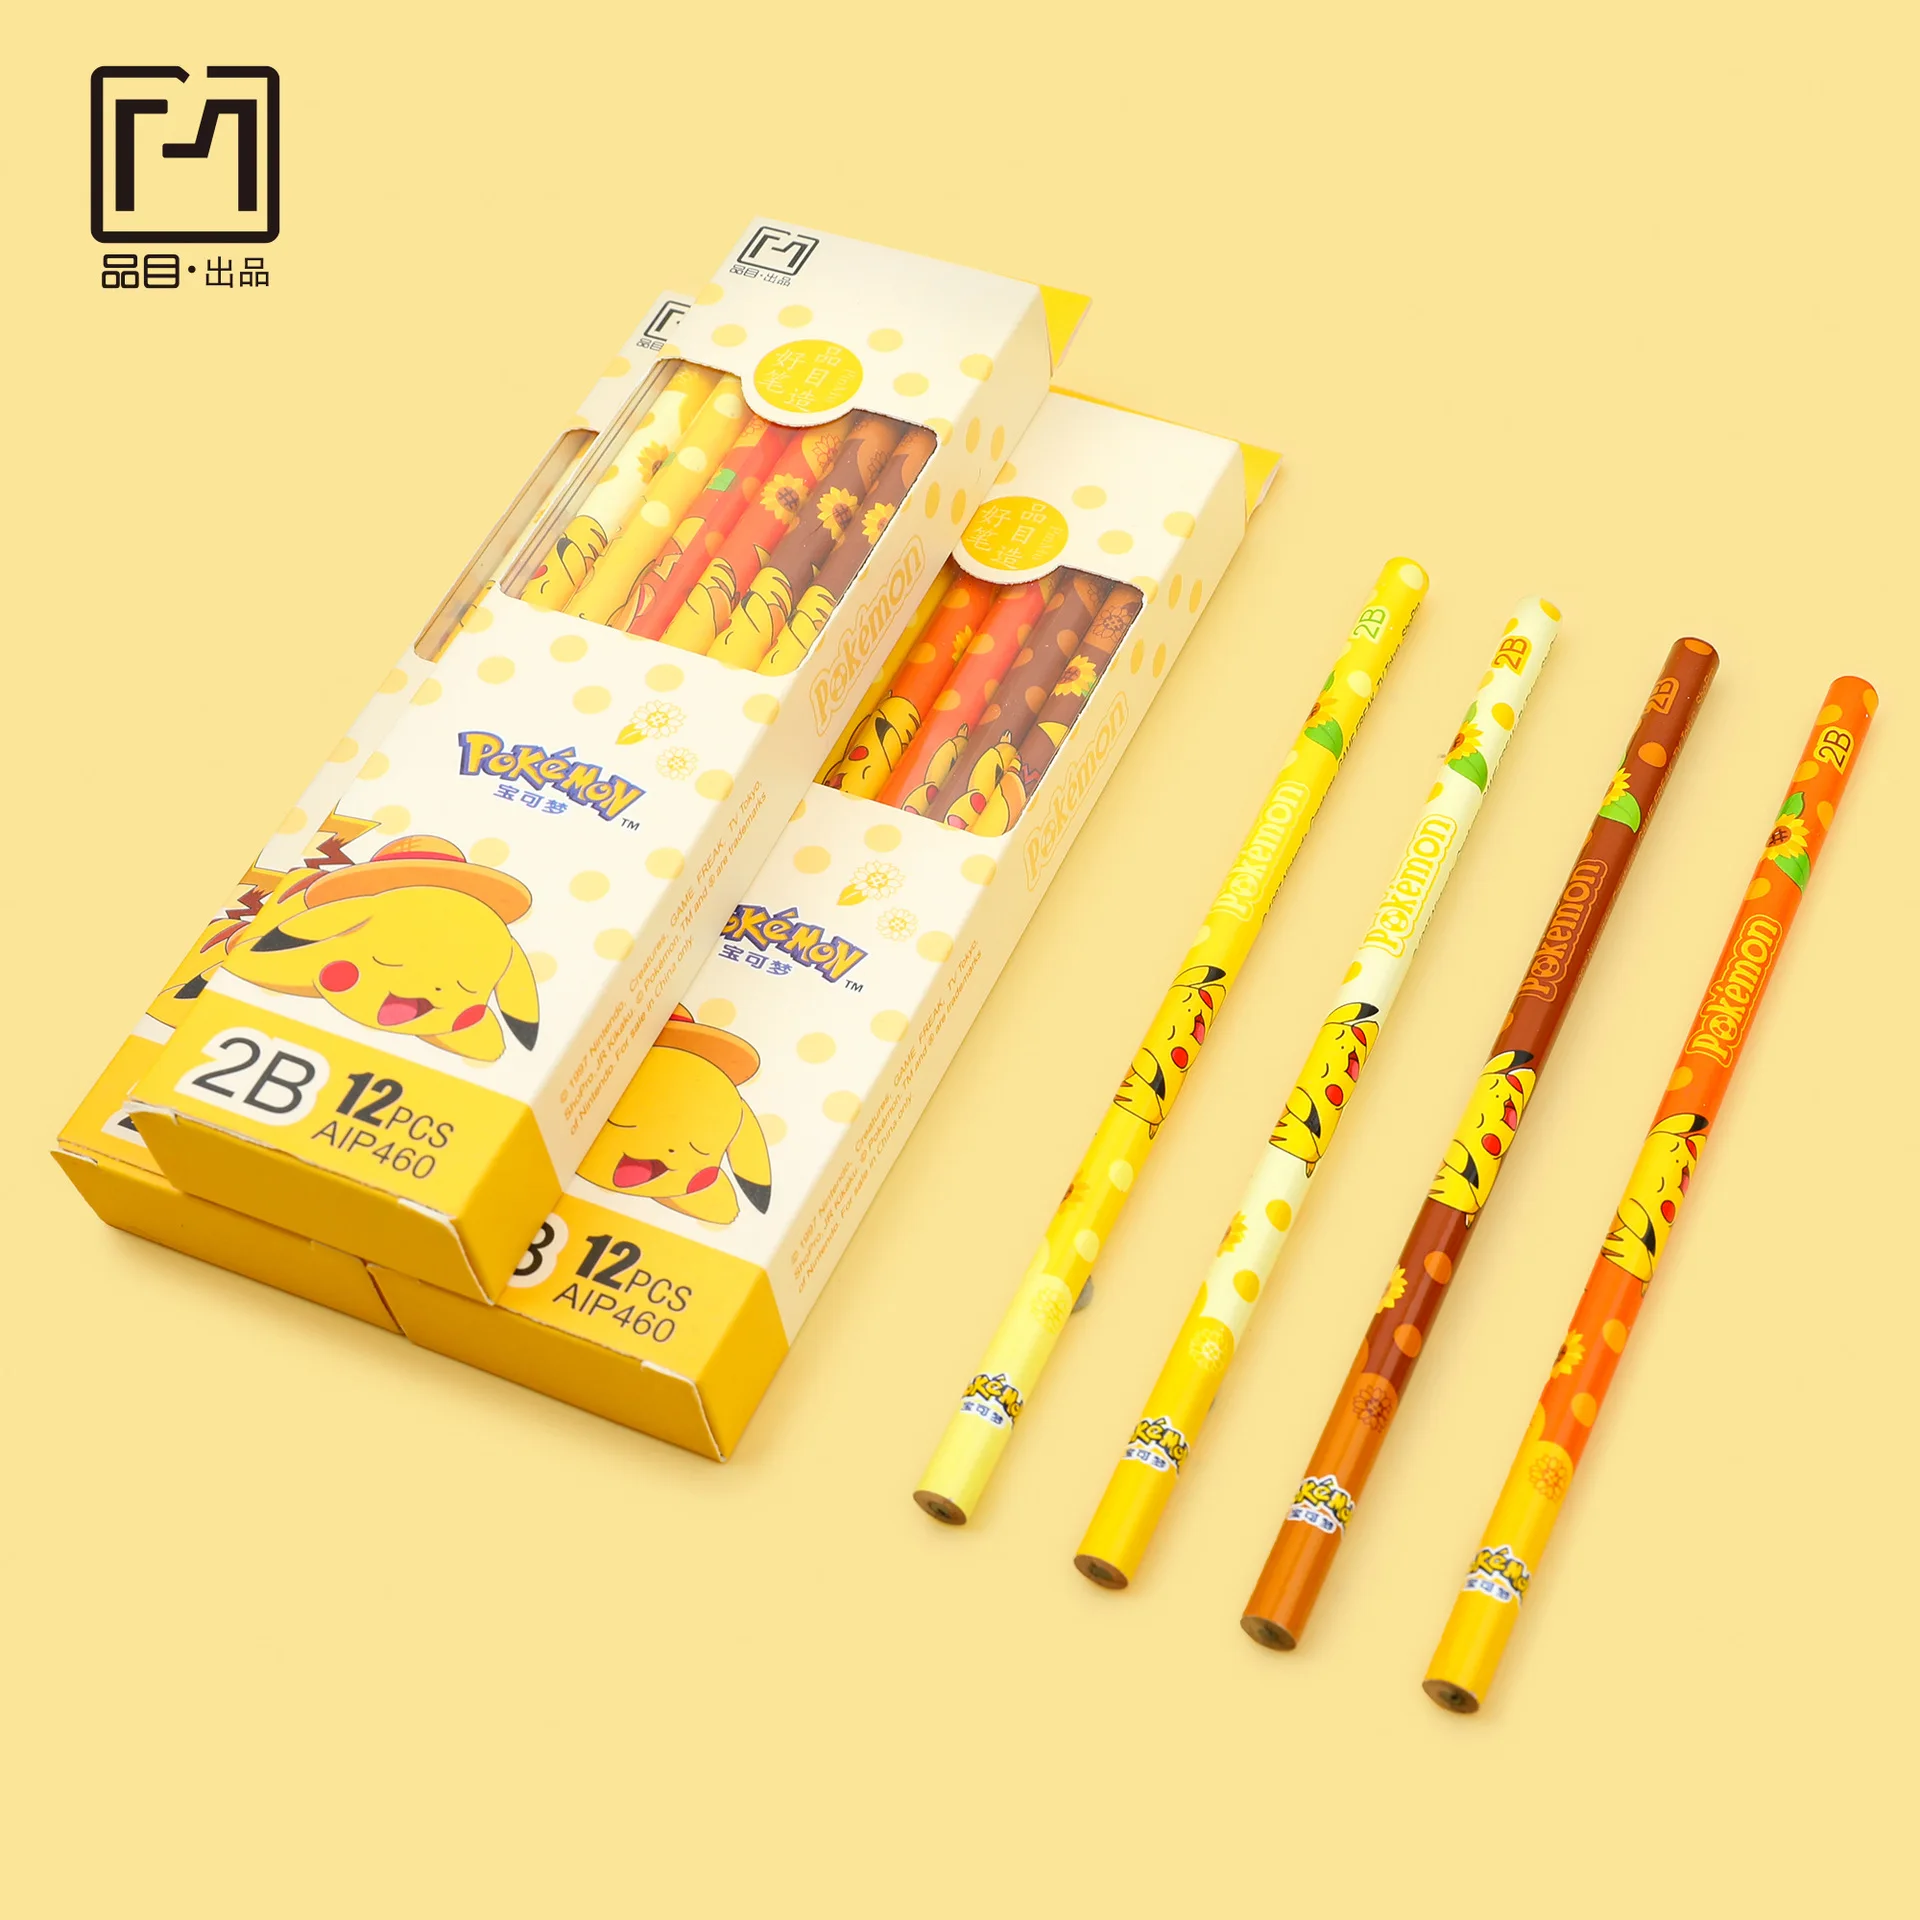 Pokemon 2B Pencil HB Pencil Boxed Children's Cartoon Japanese Student Stationery School Supplies Painting Pencil Learning Gift